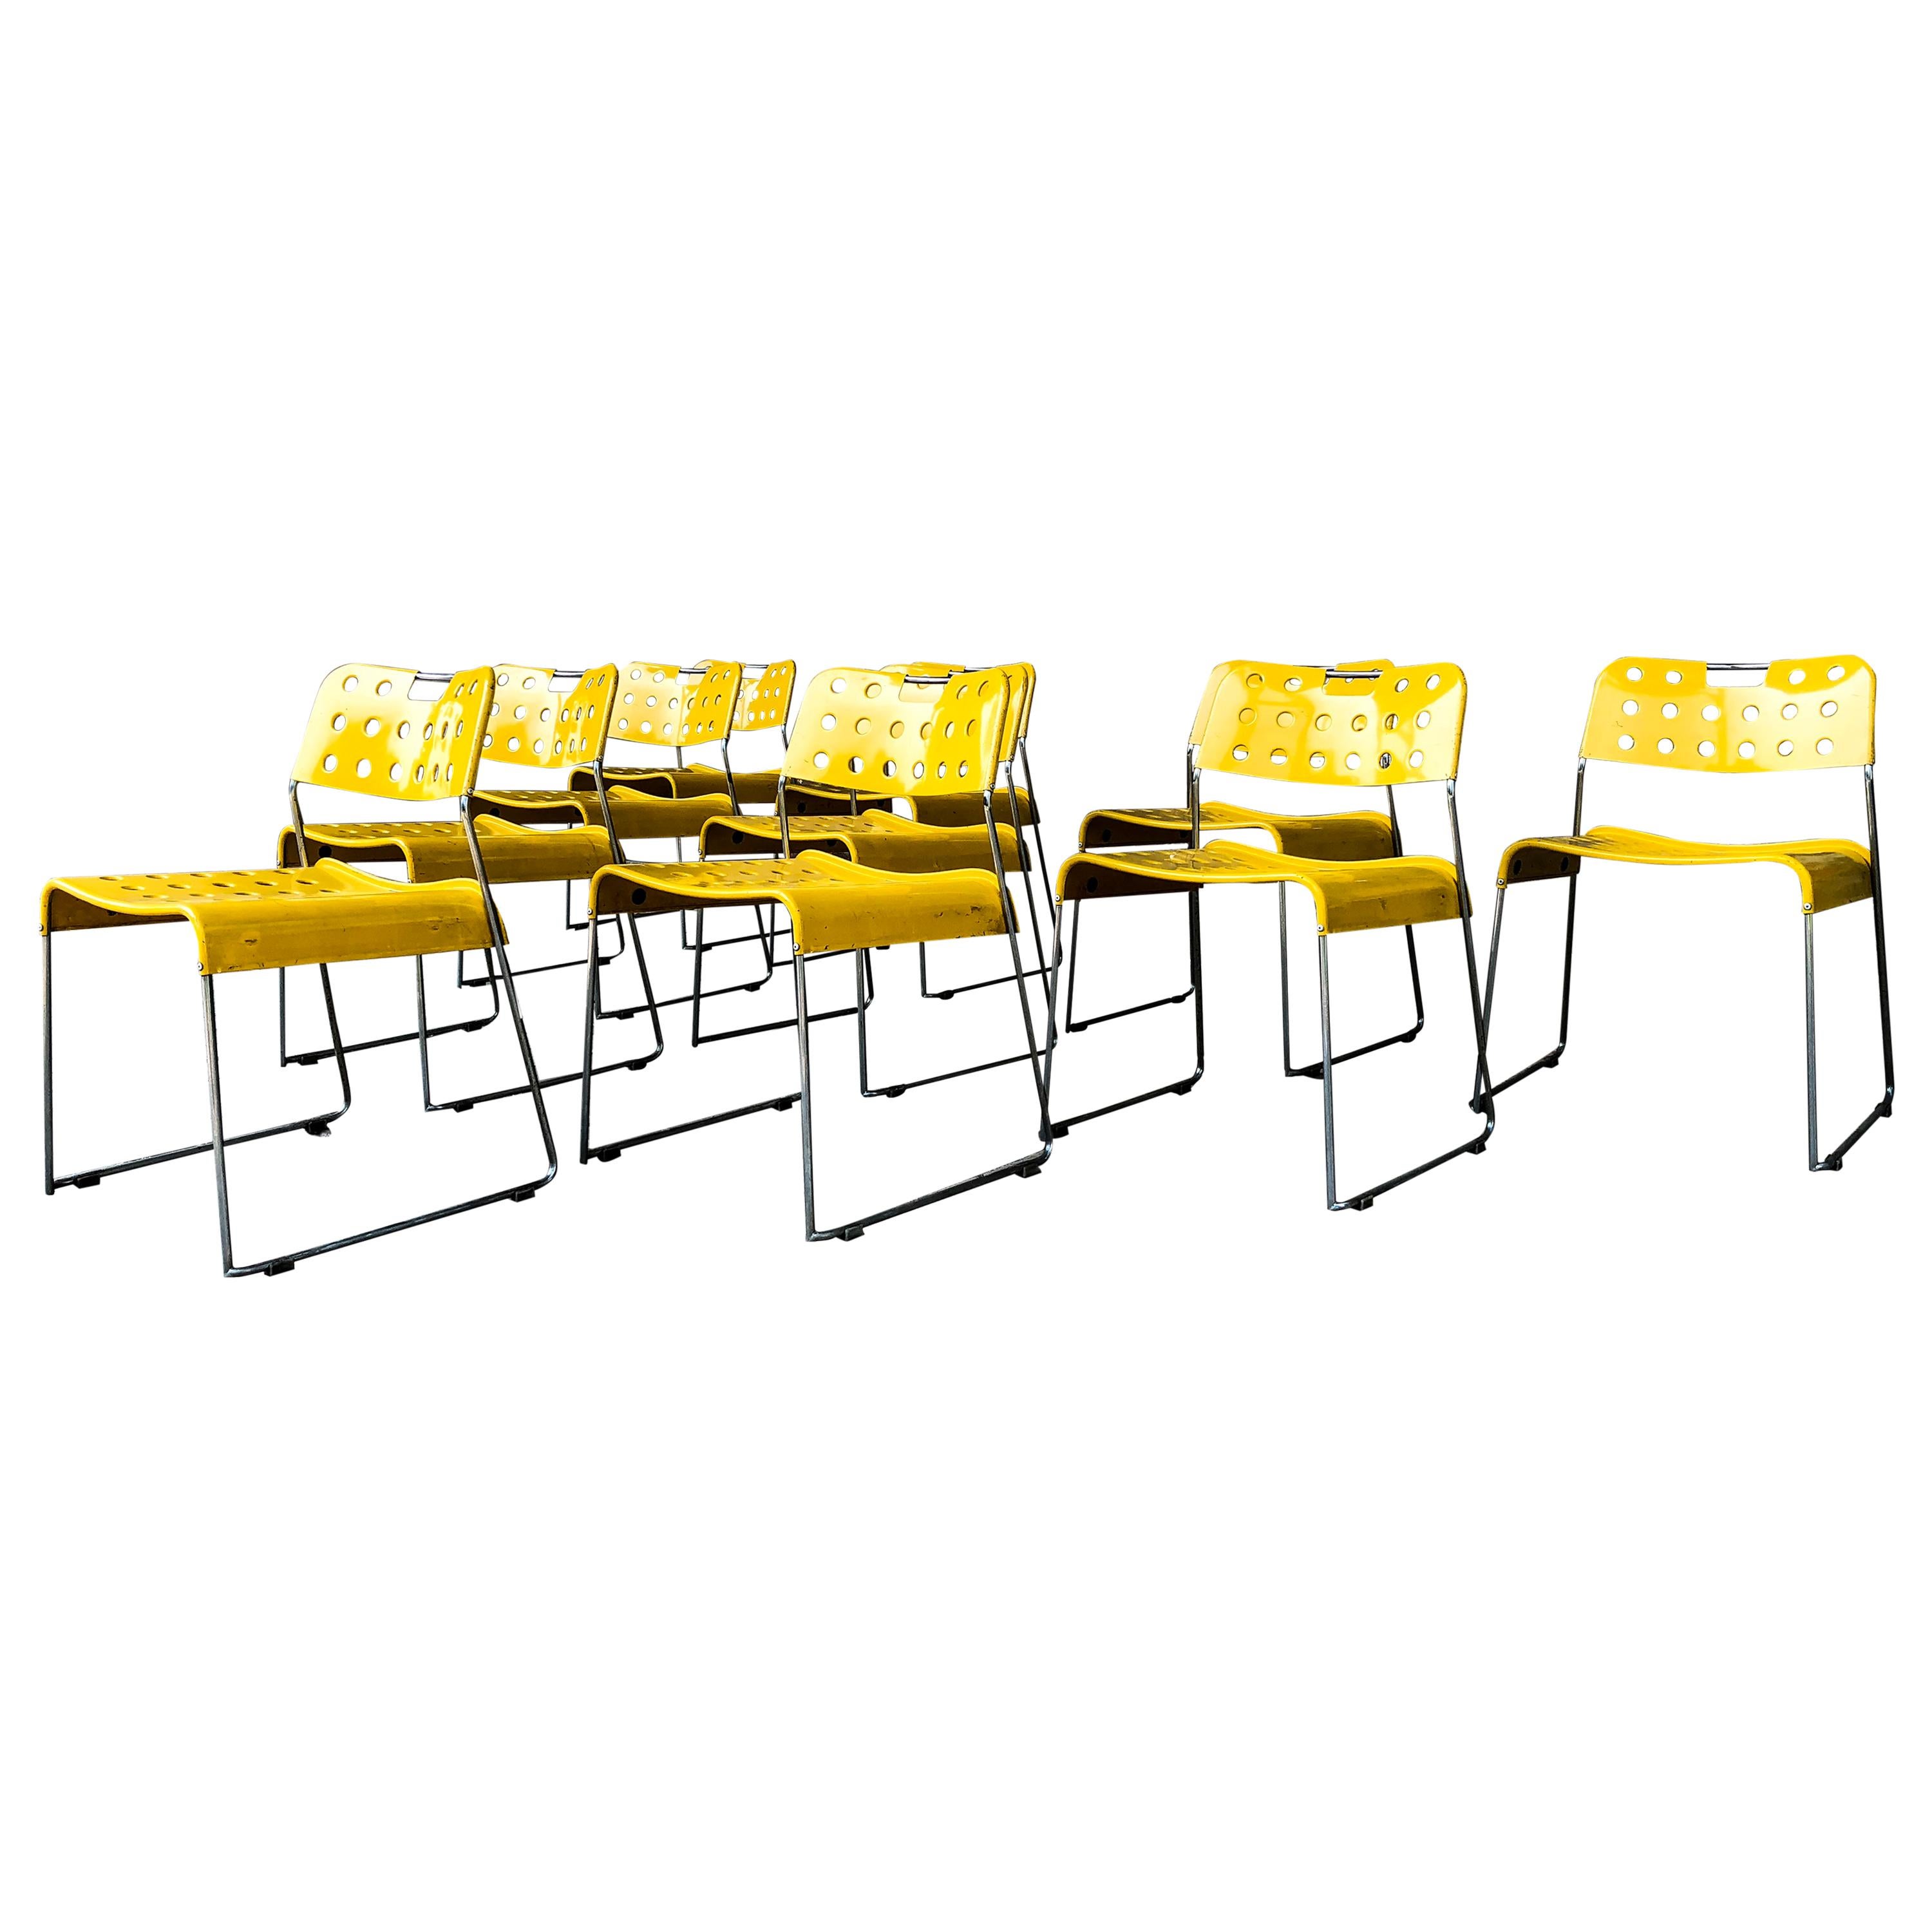 Rodney Kinsman Space Age Yellow Omstak Chair for Bieffeplast, 1971, Set 0f 18 In Good Condition For Sale In Vicenza, IT